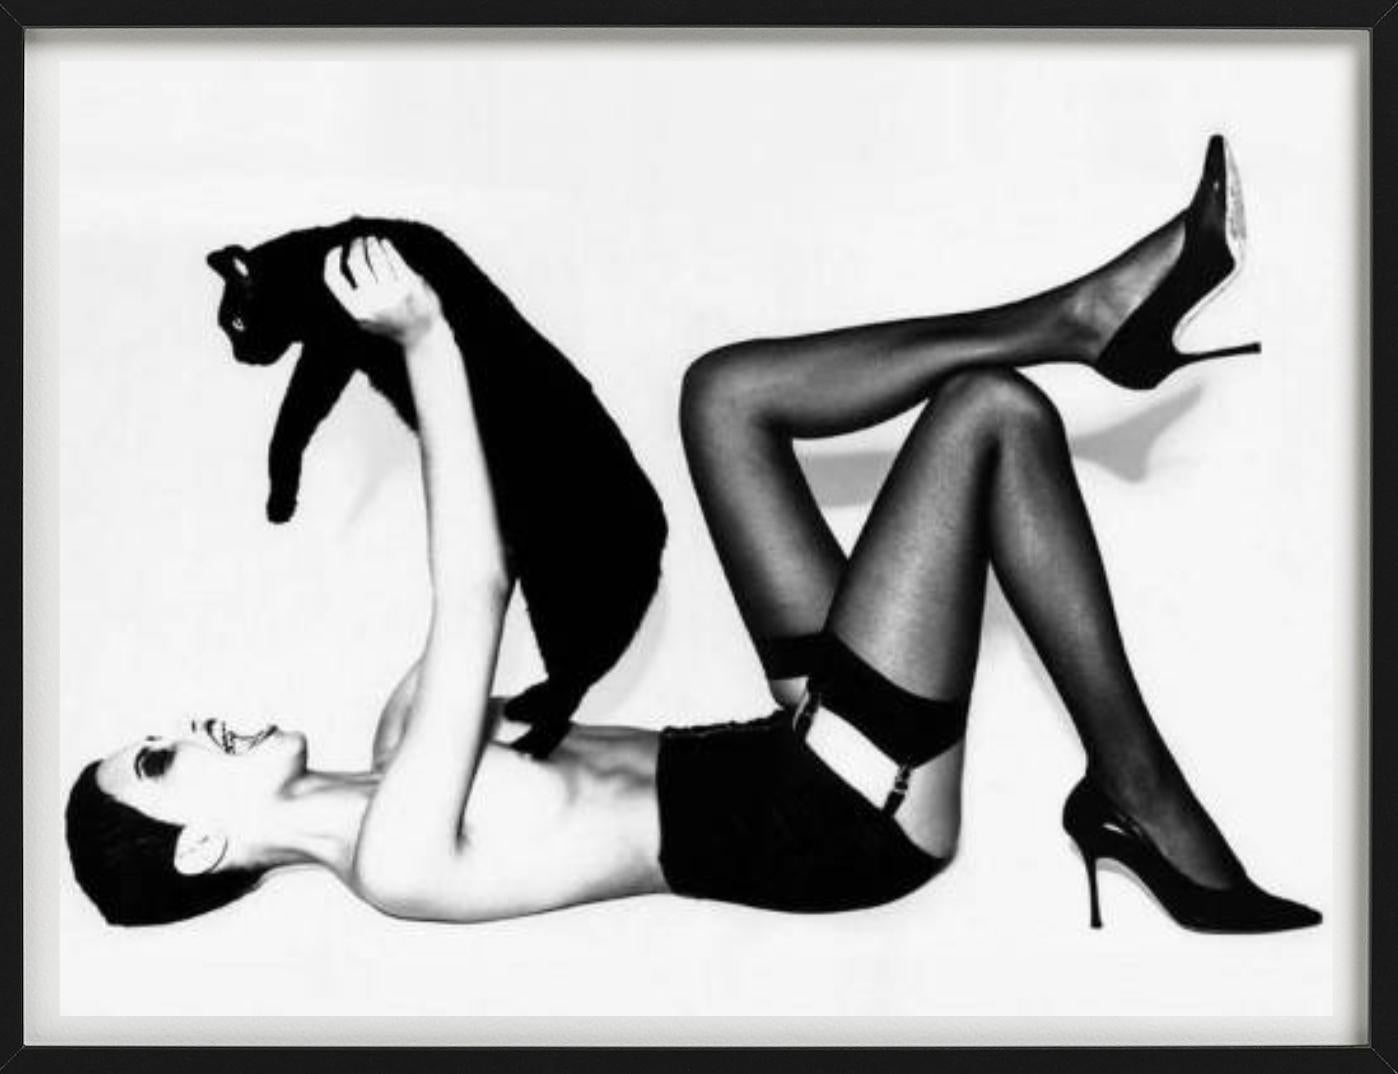 Adriana Lima Wicked II - in tights with black cat, fine art photography, 1999 - Photograph by Ellen von Unwerth